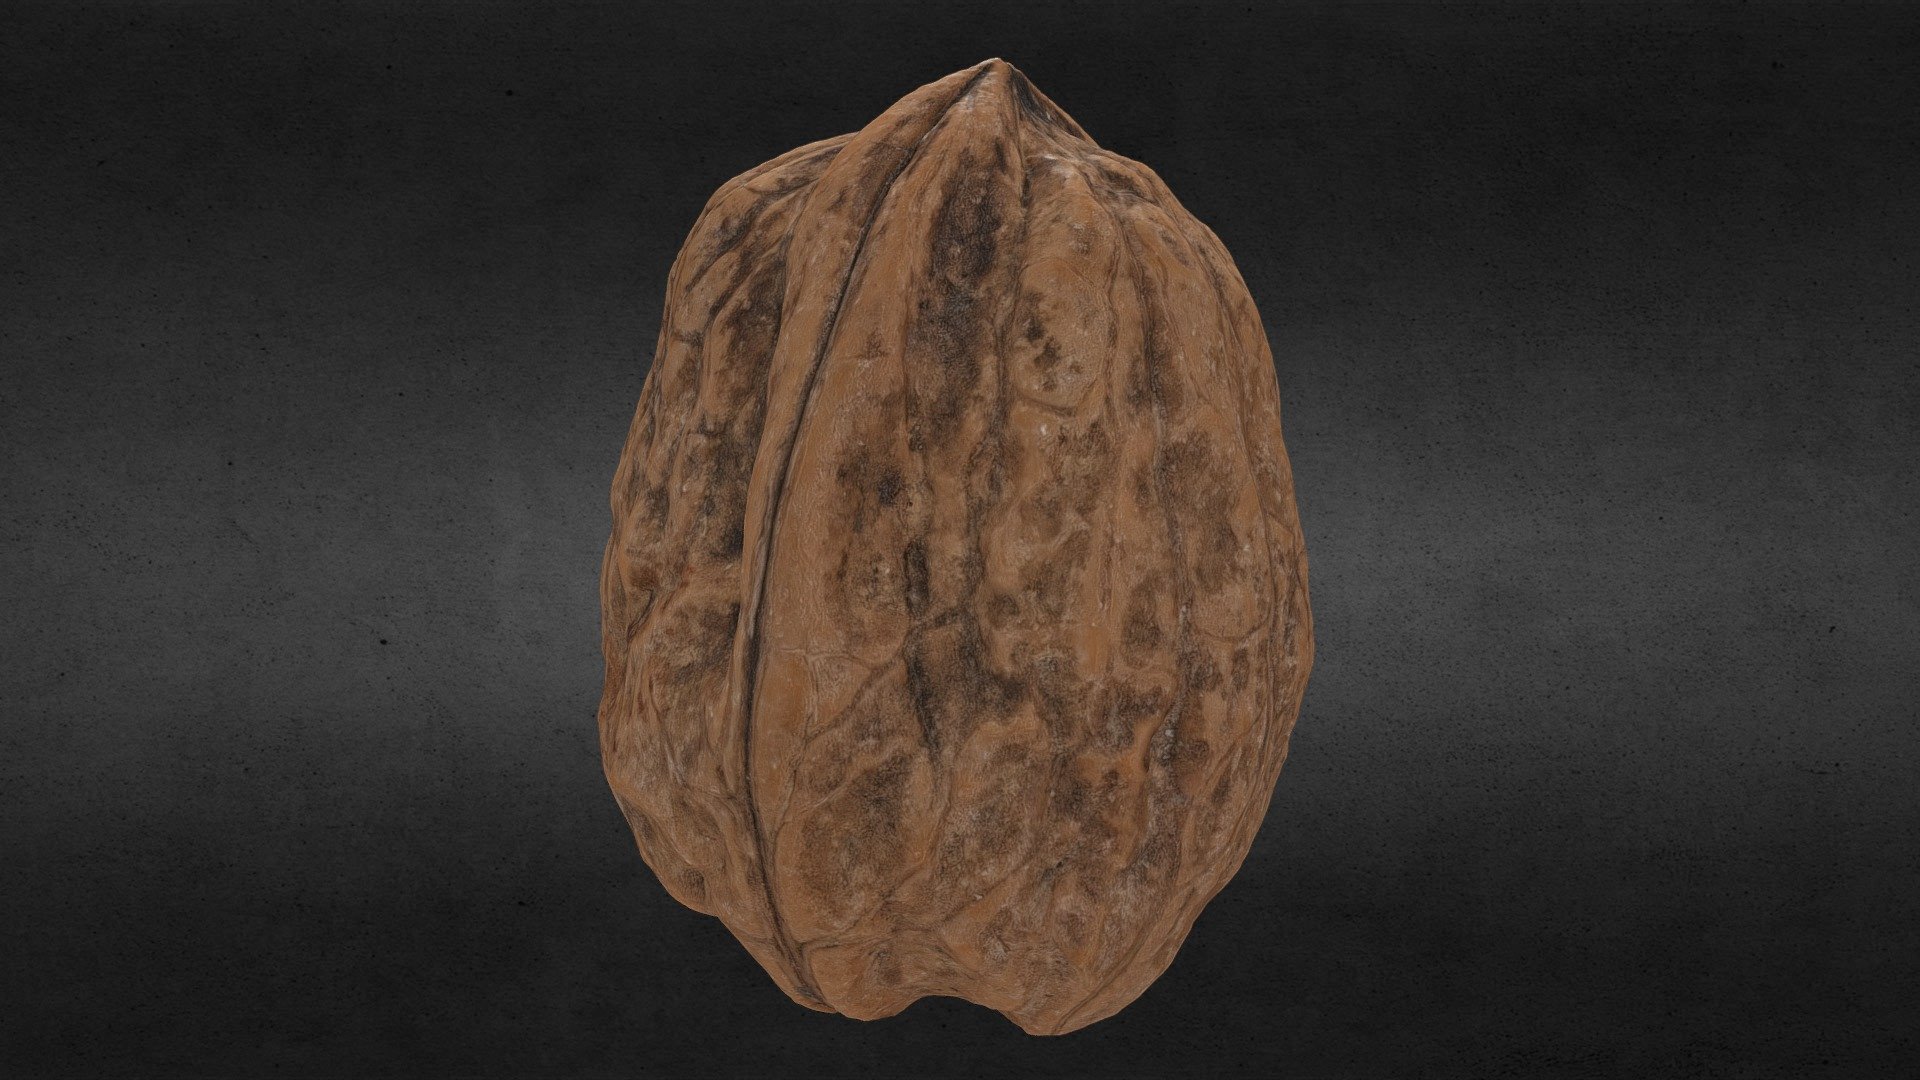 Walnuts are the round, single-seed stone fruits of the walnut tree. They are commonly used for food. They ripen between September and November in the northern hemisphere. The brown, wrinkly walnut shell is enclosed in a husk.[1] Shells of walnuts available in commerce usually have two segments (but three or four-segment shells can also form). During the ripening process, the husk becomes brittle and the shell hard. The shell encloses the kernel or meat, which is usually in two halves separated by a membranous partition.[1] The seed kernels – commonly available as shelled walnuts – are enclosed in a brown seed coat which contains antioxidants. The antioxidants protect the oil-rich seed from atmospheric oxygen, preventing rancidity.

wikipedia - walnuts - noce - 8k texture - Buy Royalty Free 3D model by Franko (@franko_frullo) 3d model